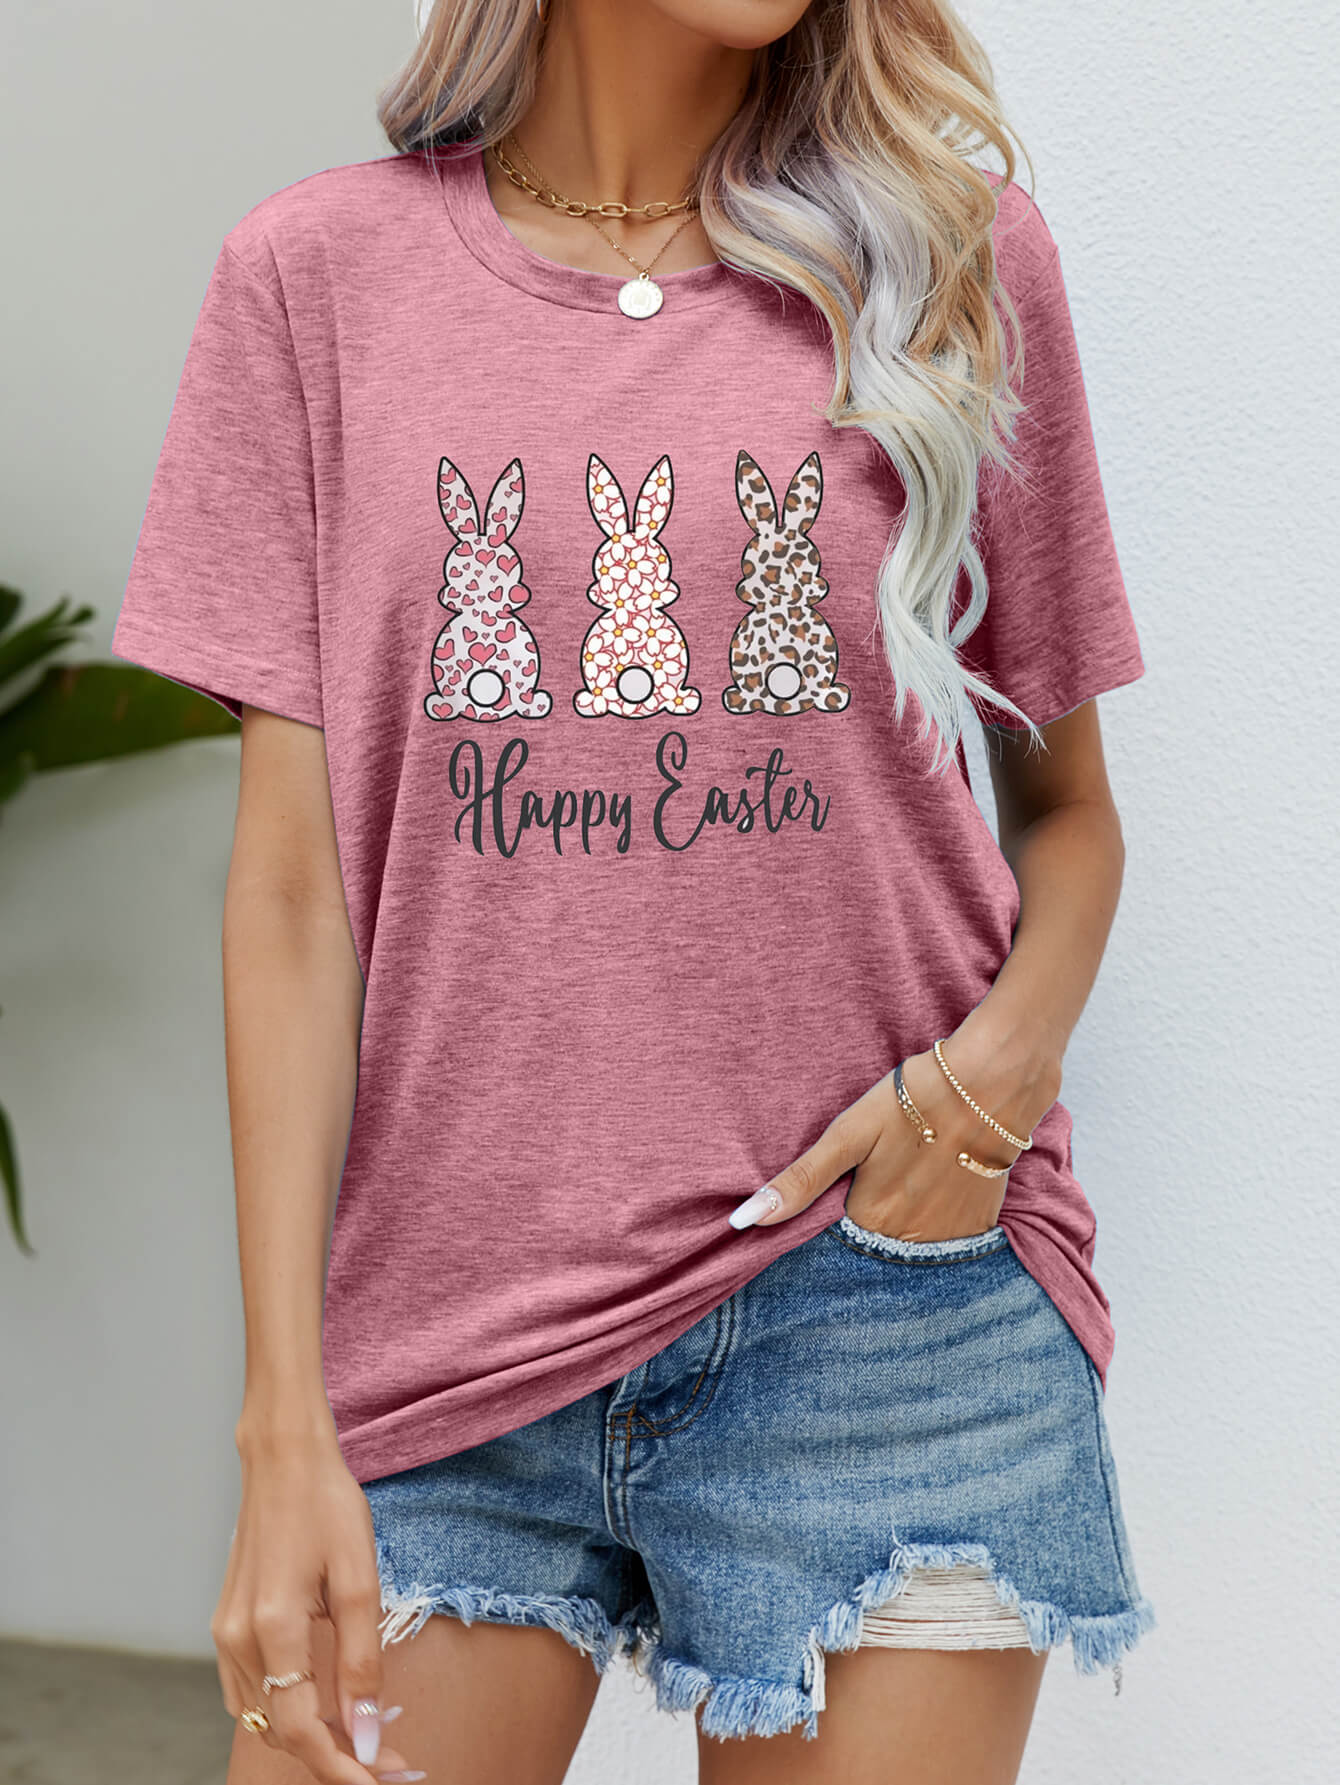 HAPPY EASTER Graphic Short Sleeve Tee - Pink / S - T-Shirts - Shirts & Tops - 13 - 2024